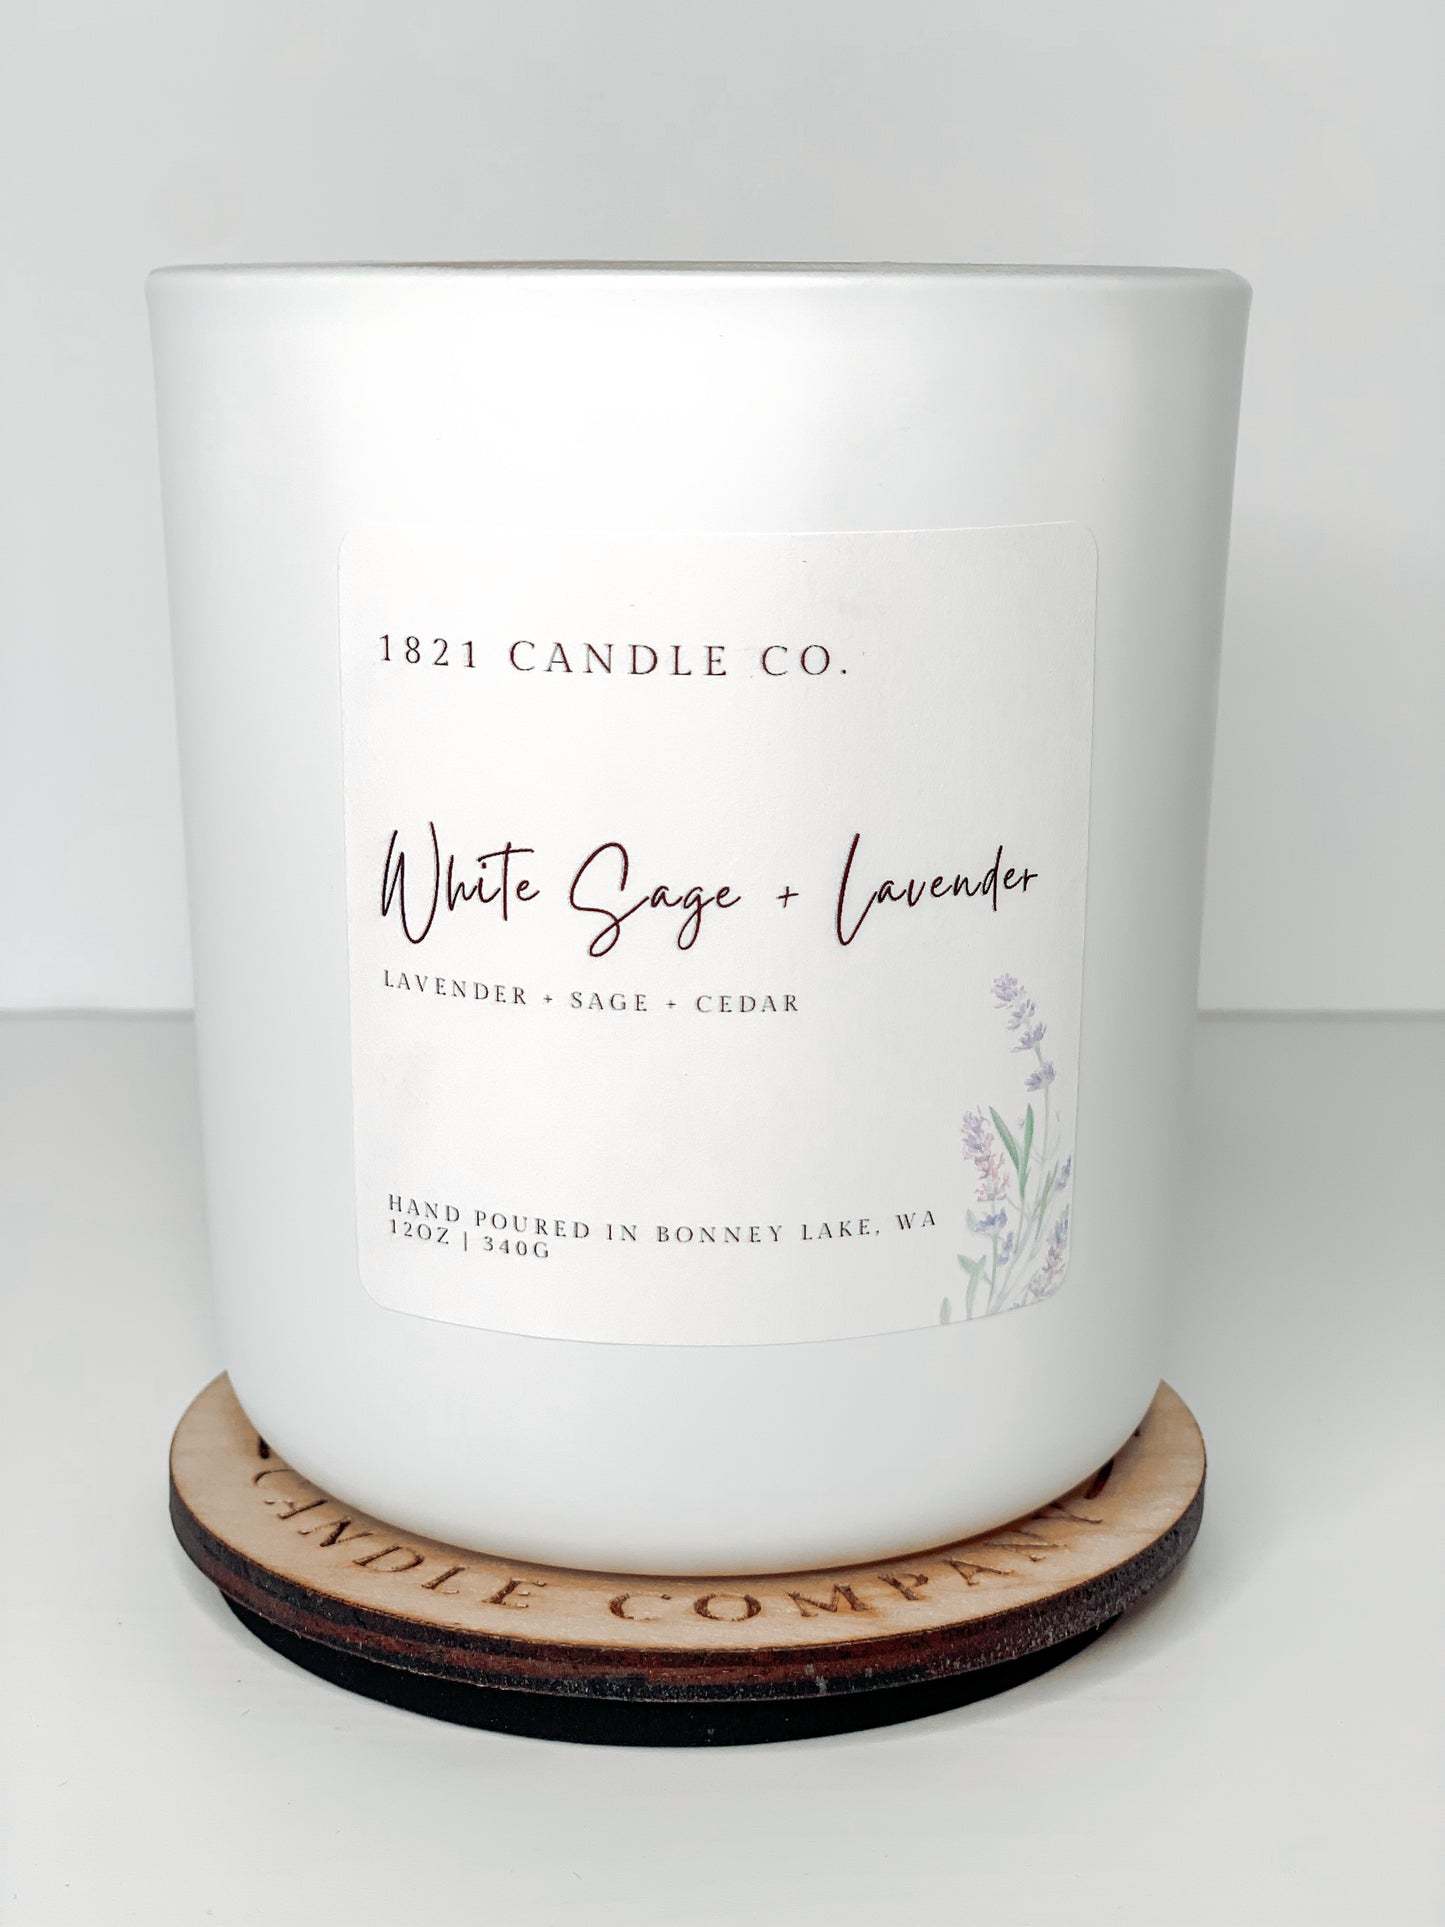 White Sage + Lavender Candle – 1821 Candle Co.